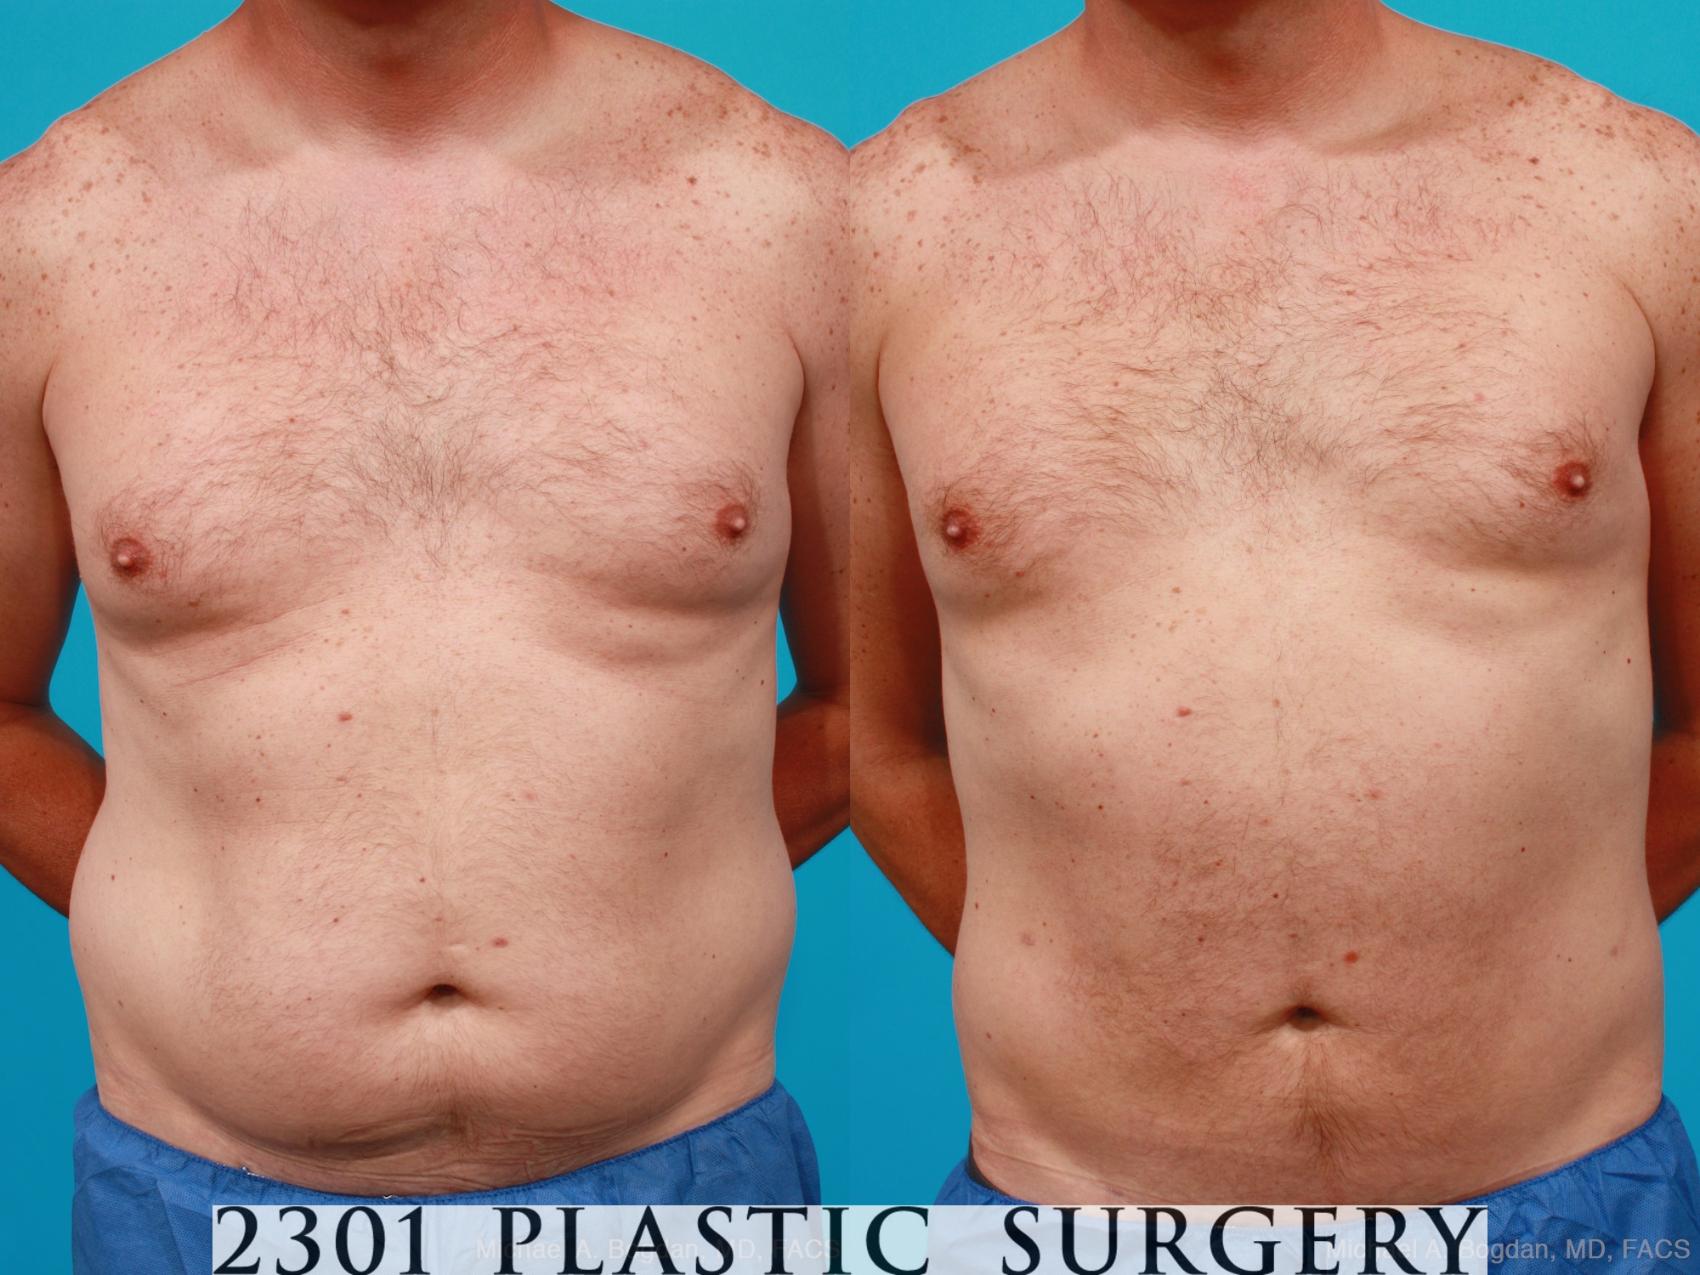 Male Liposuction Before and After Pictures Case 160